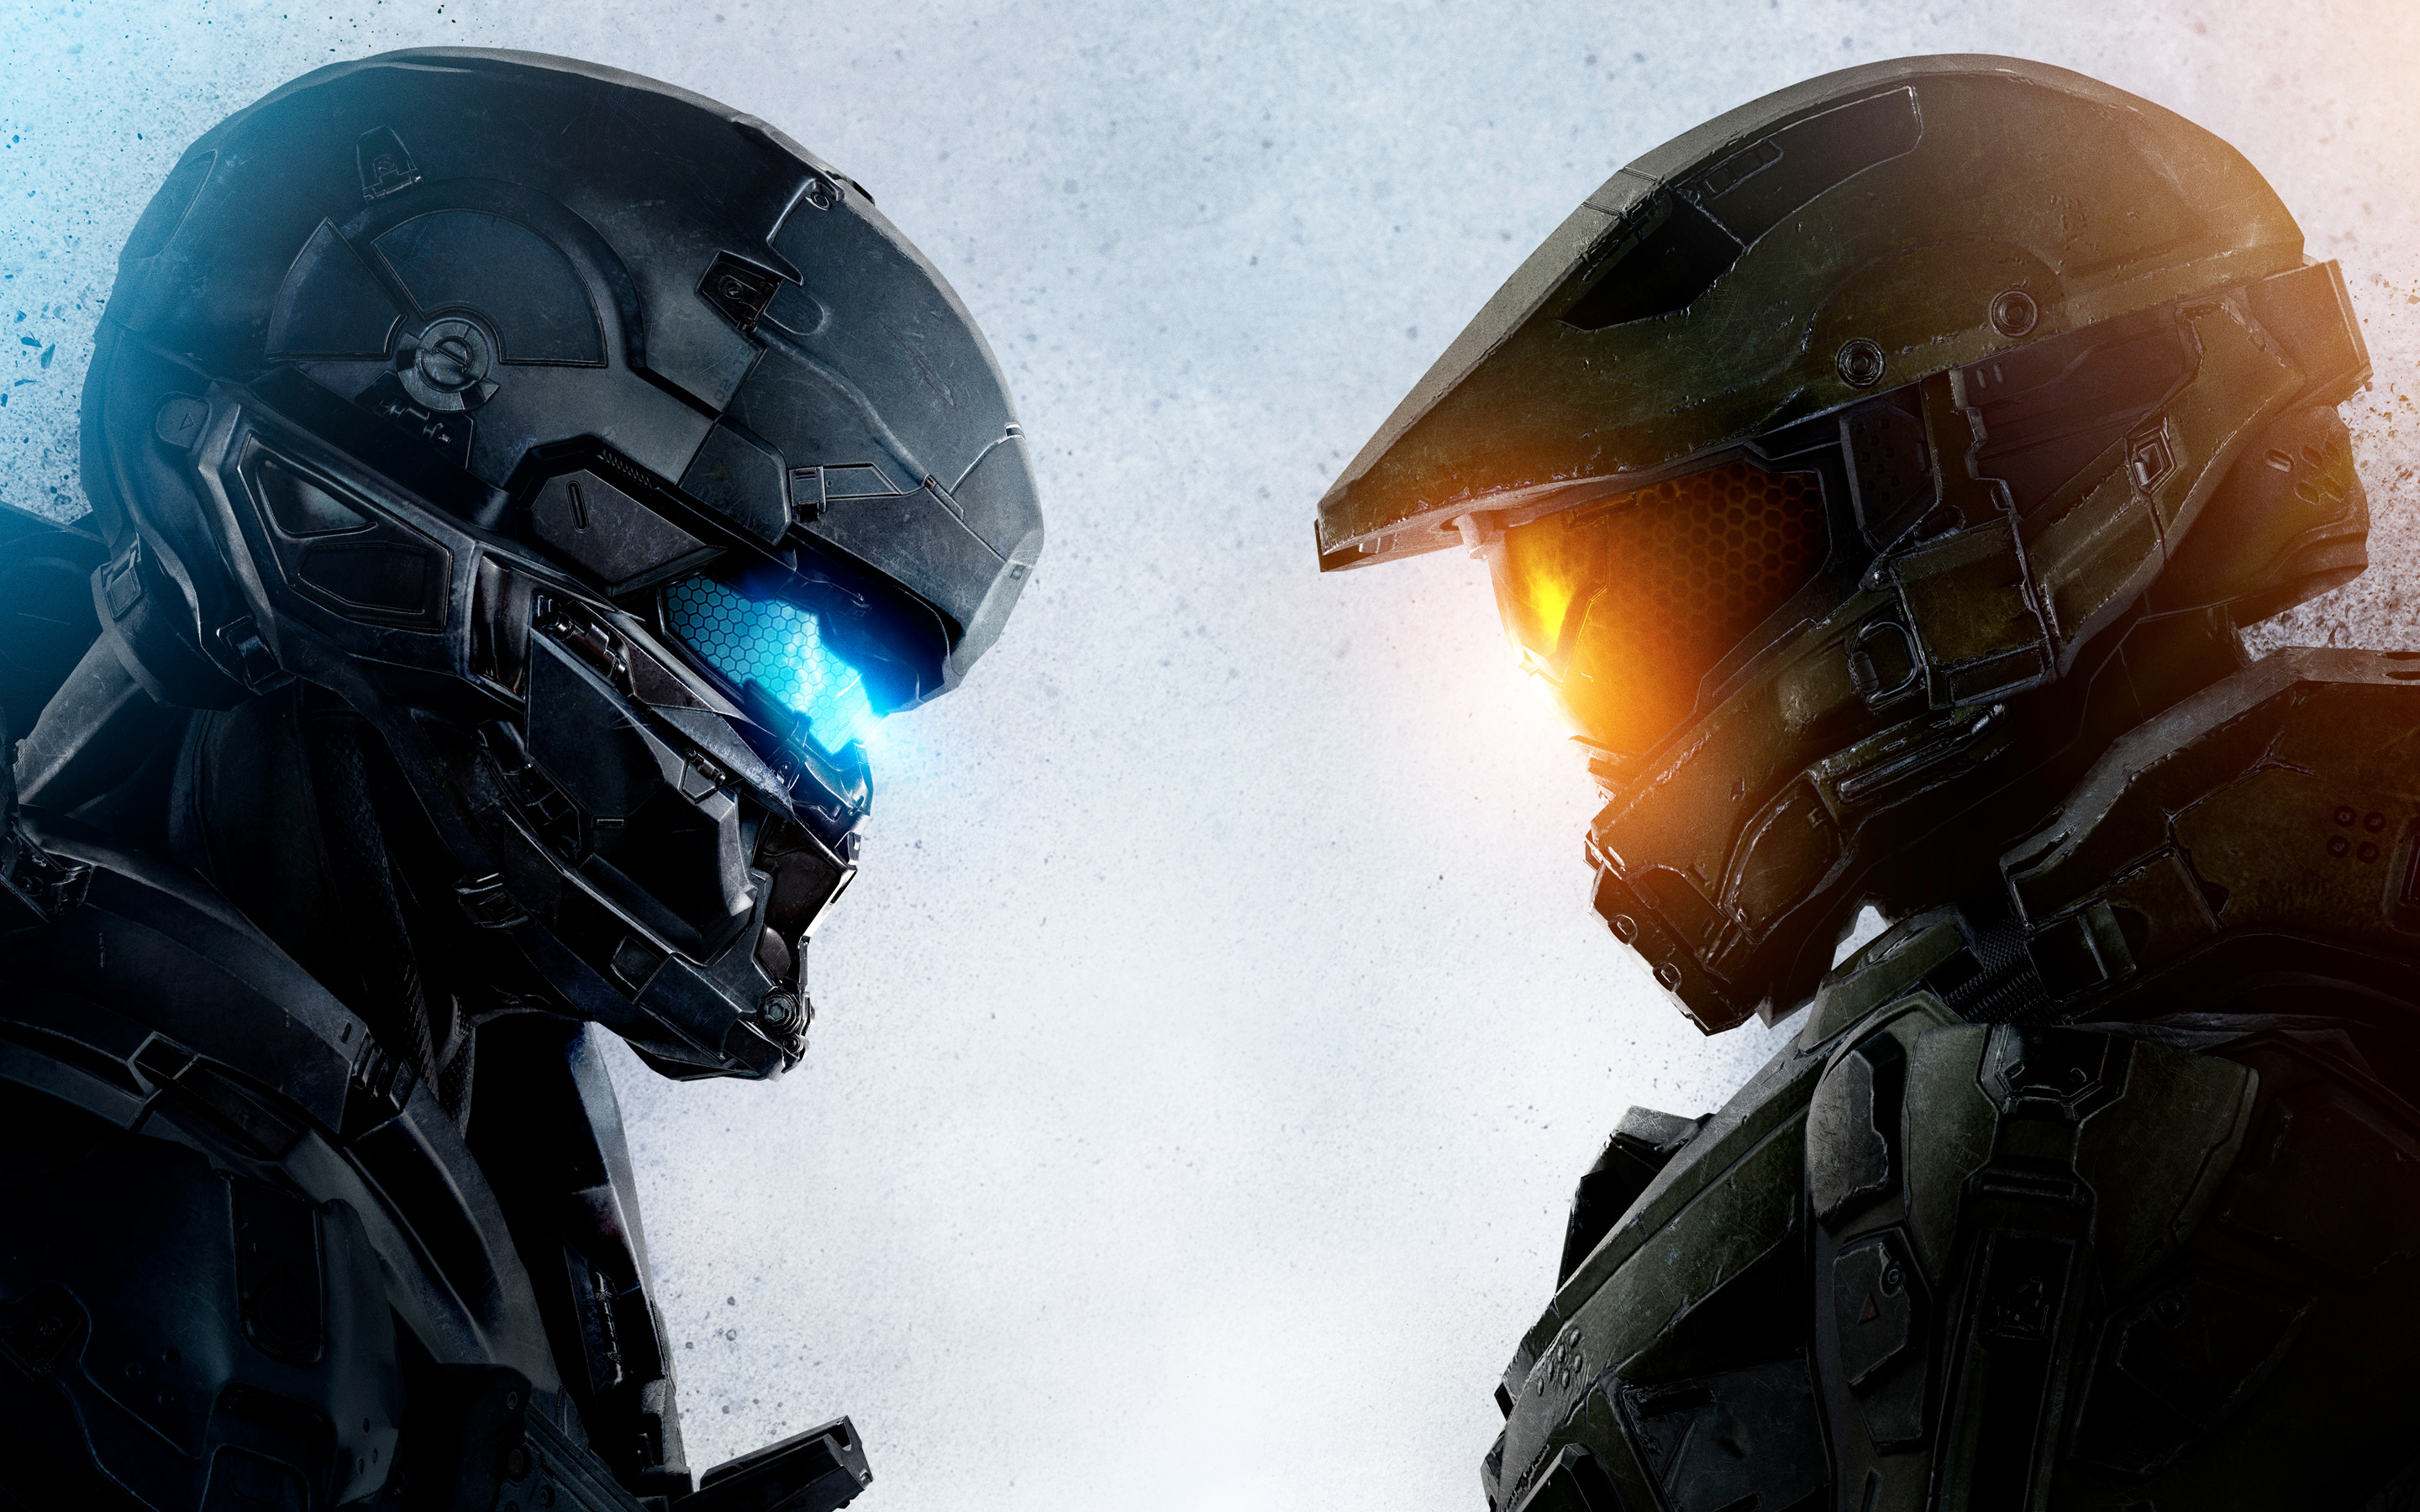 2015 Halo 5 Guardians Wallpapers HD Wallpapers 2880x1800